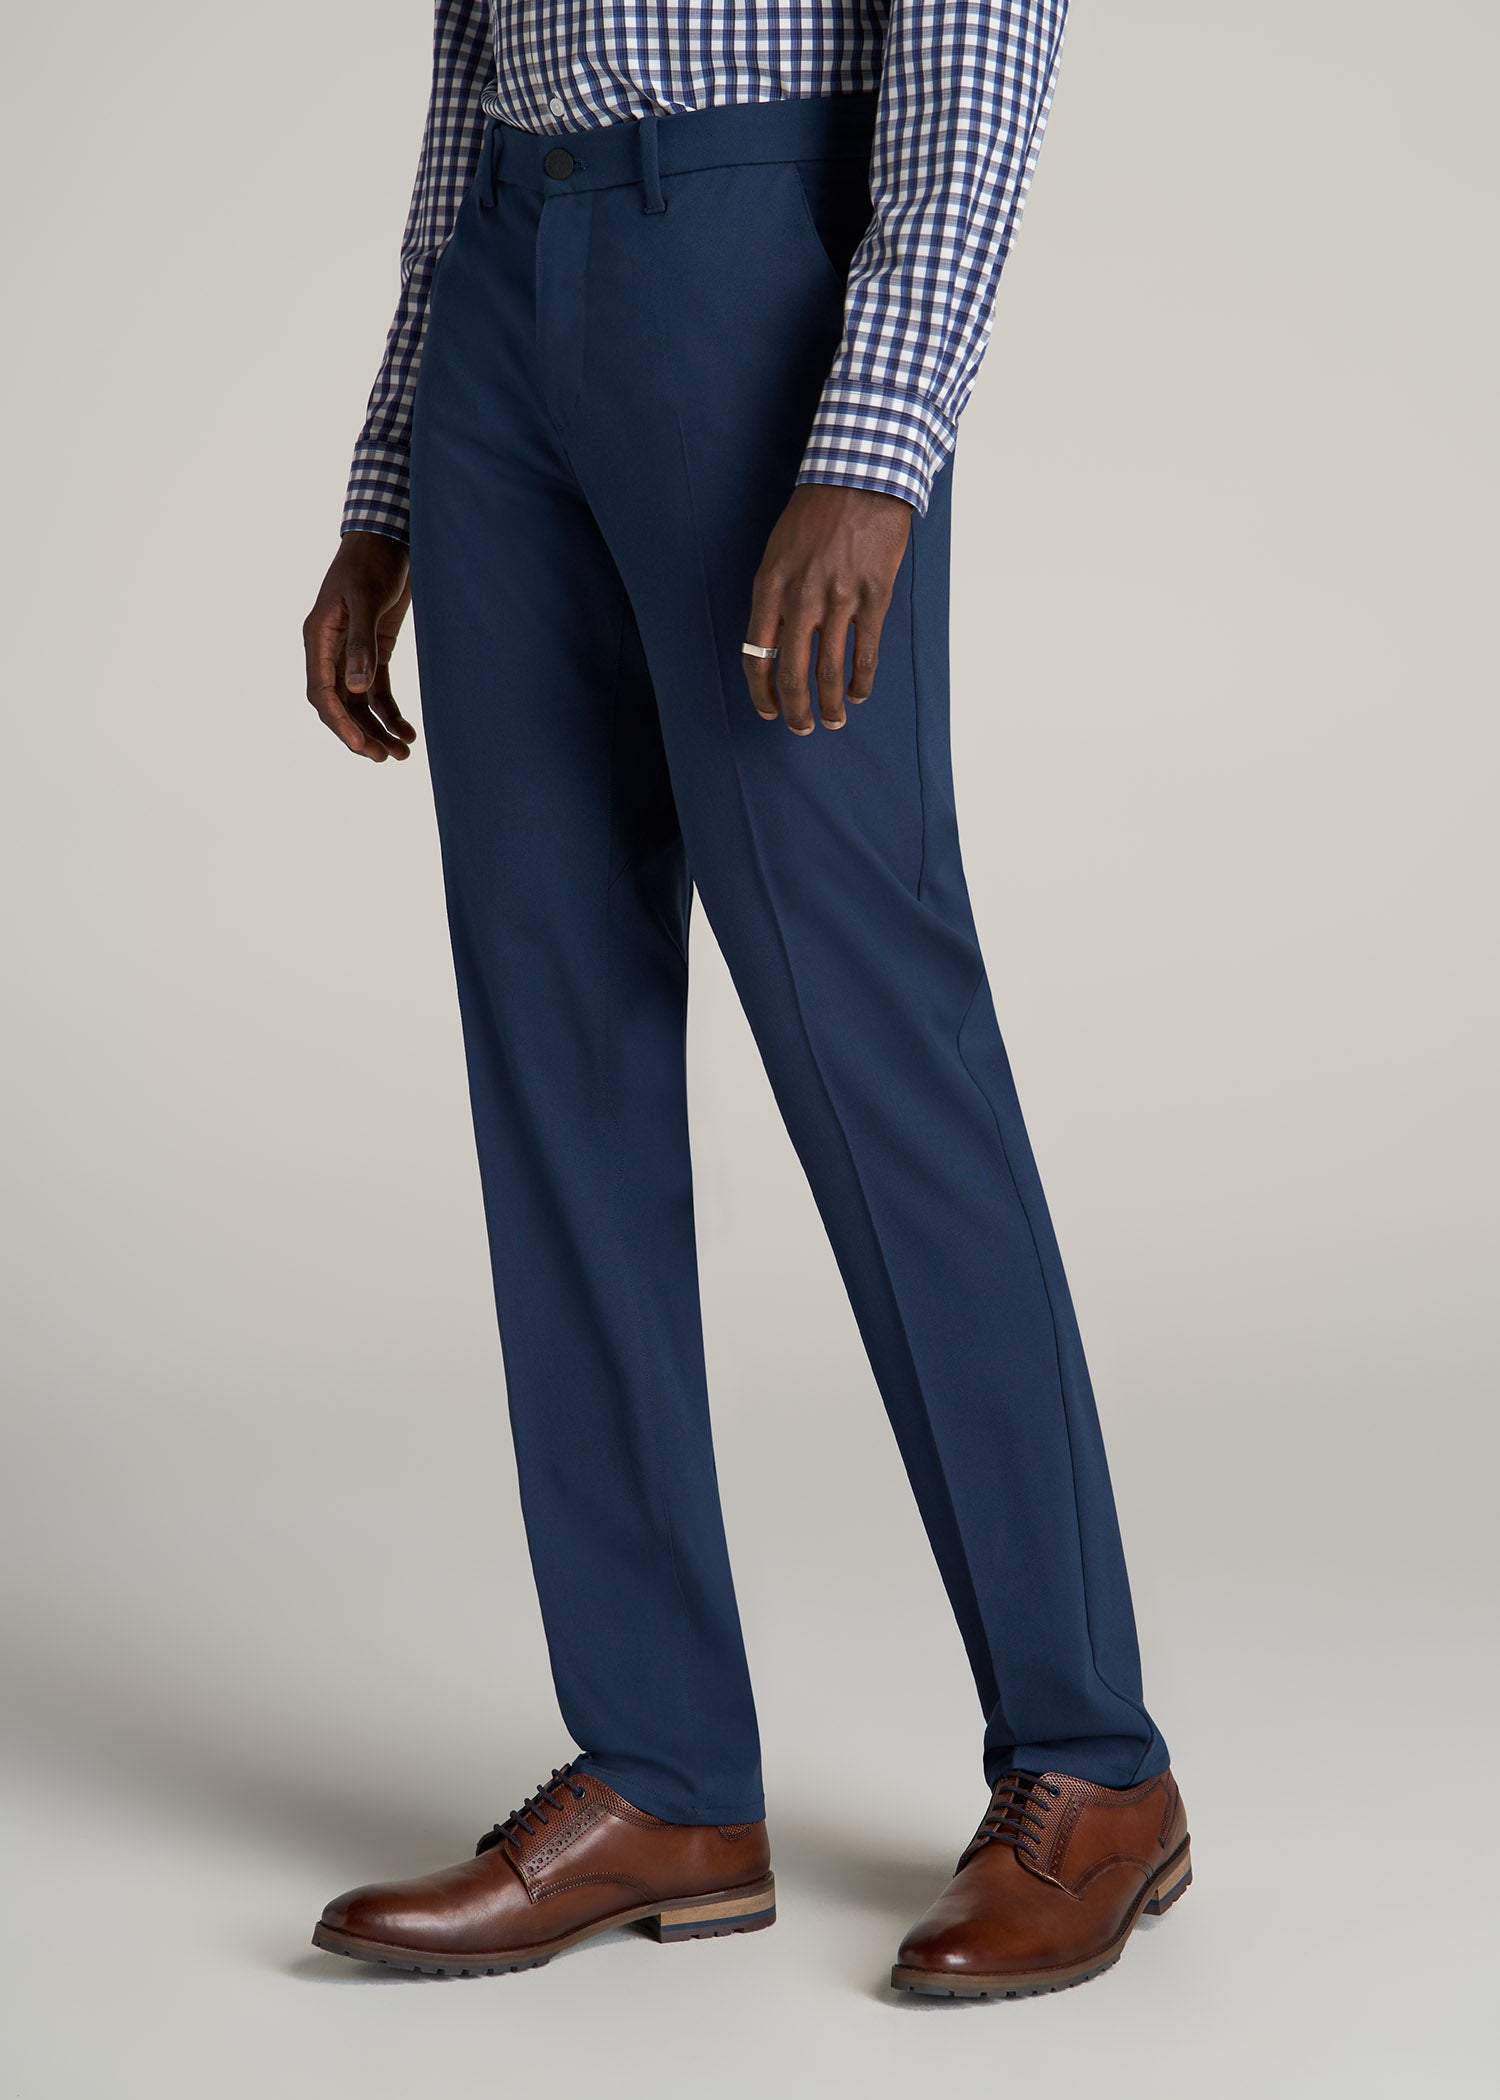 The Best-Fitting Pants for Your Build | Stitch Fix Men